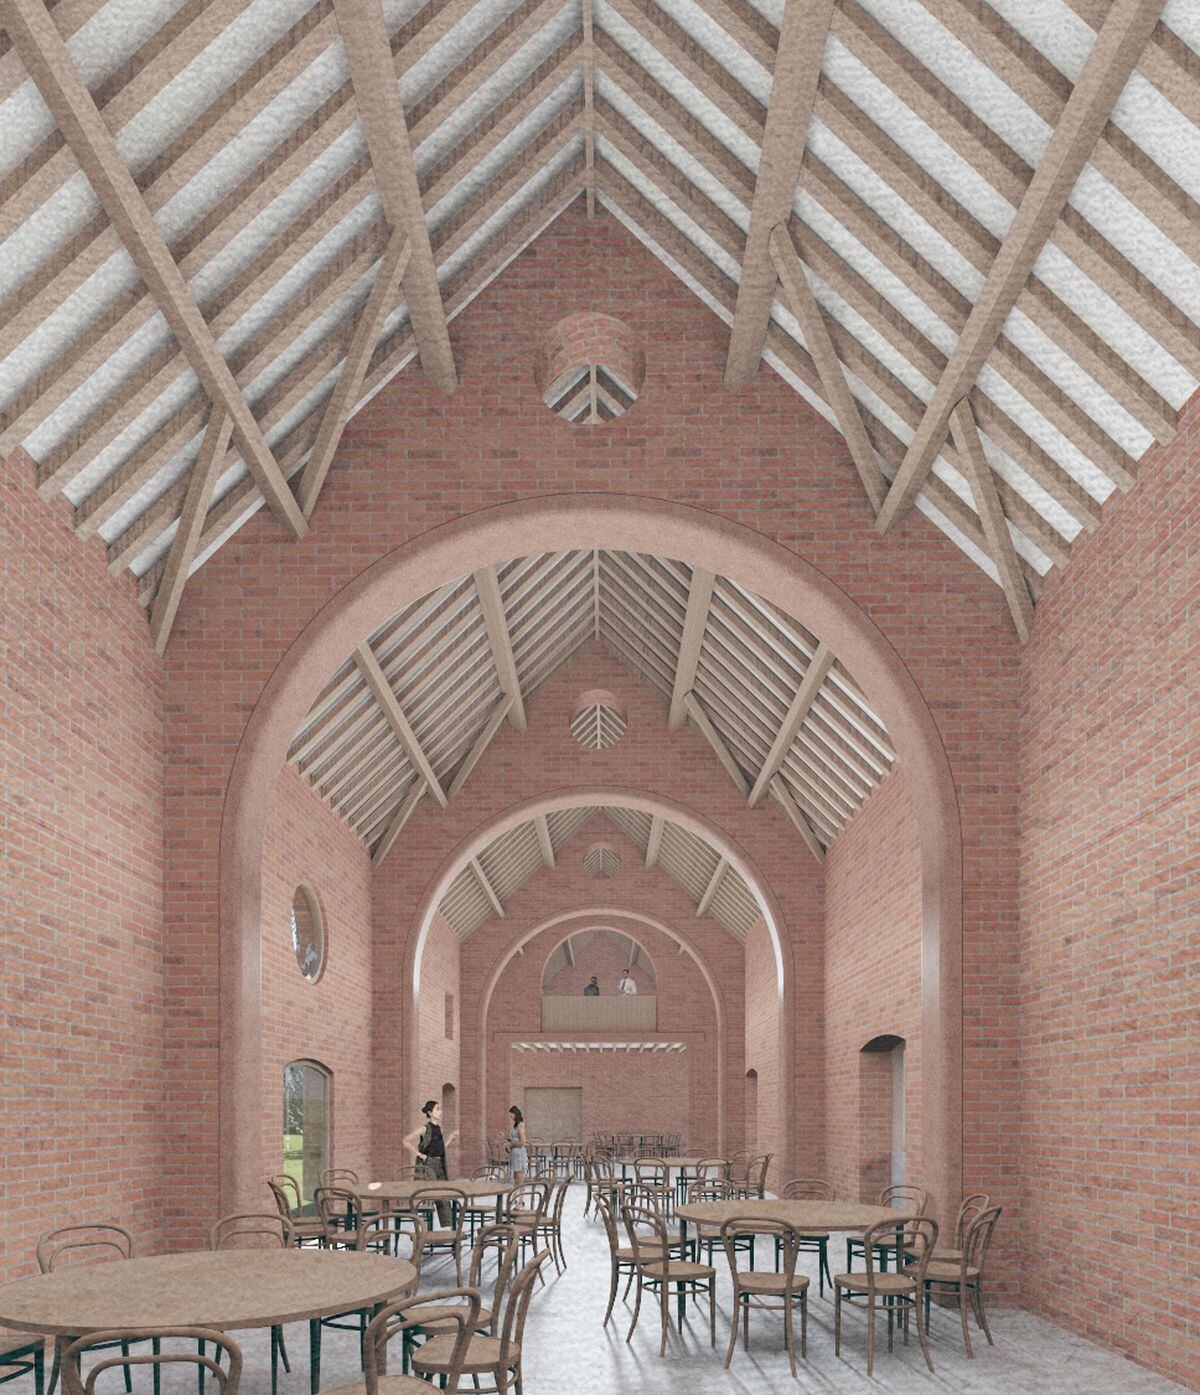 A view of the proposed dining hall at the Meashill Farm project